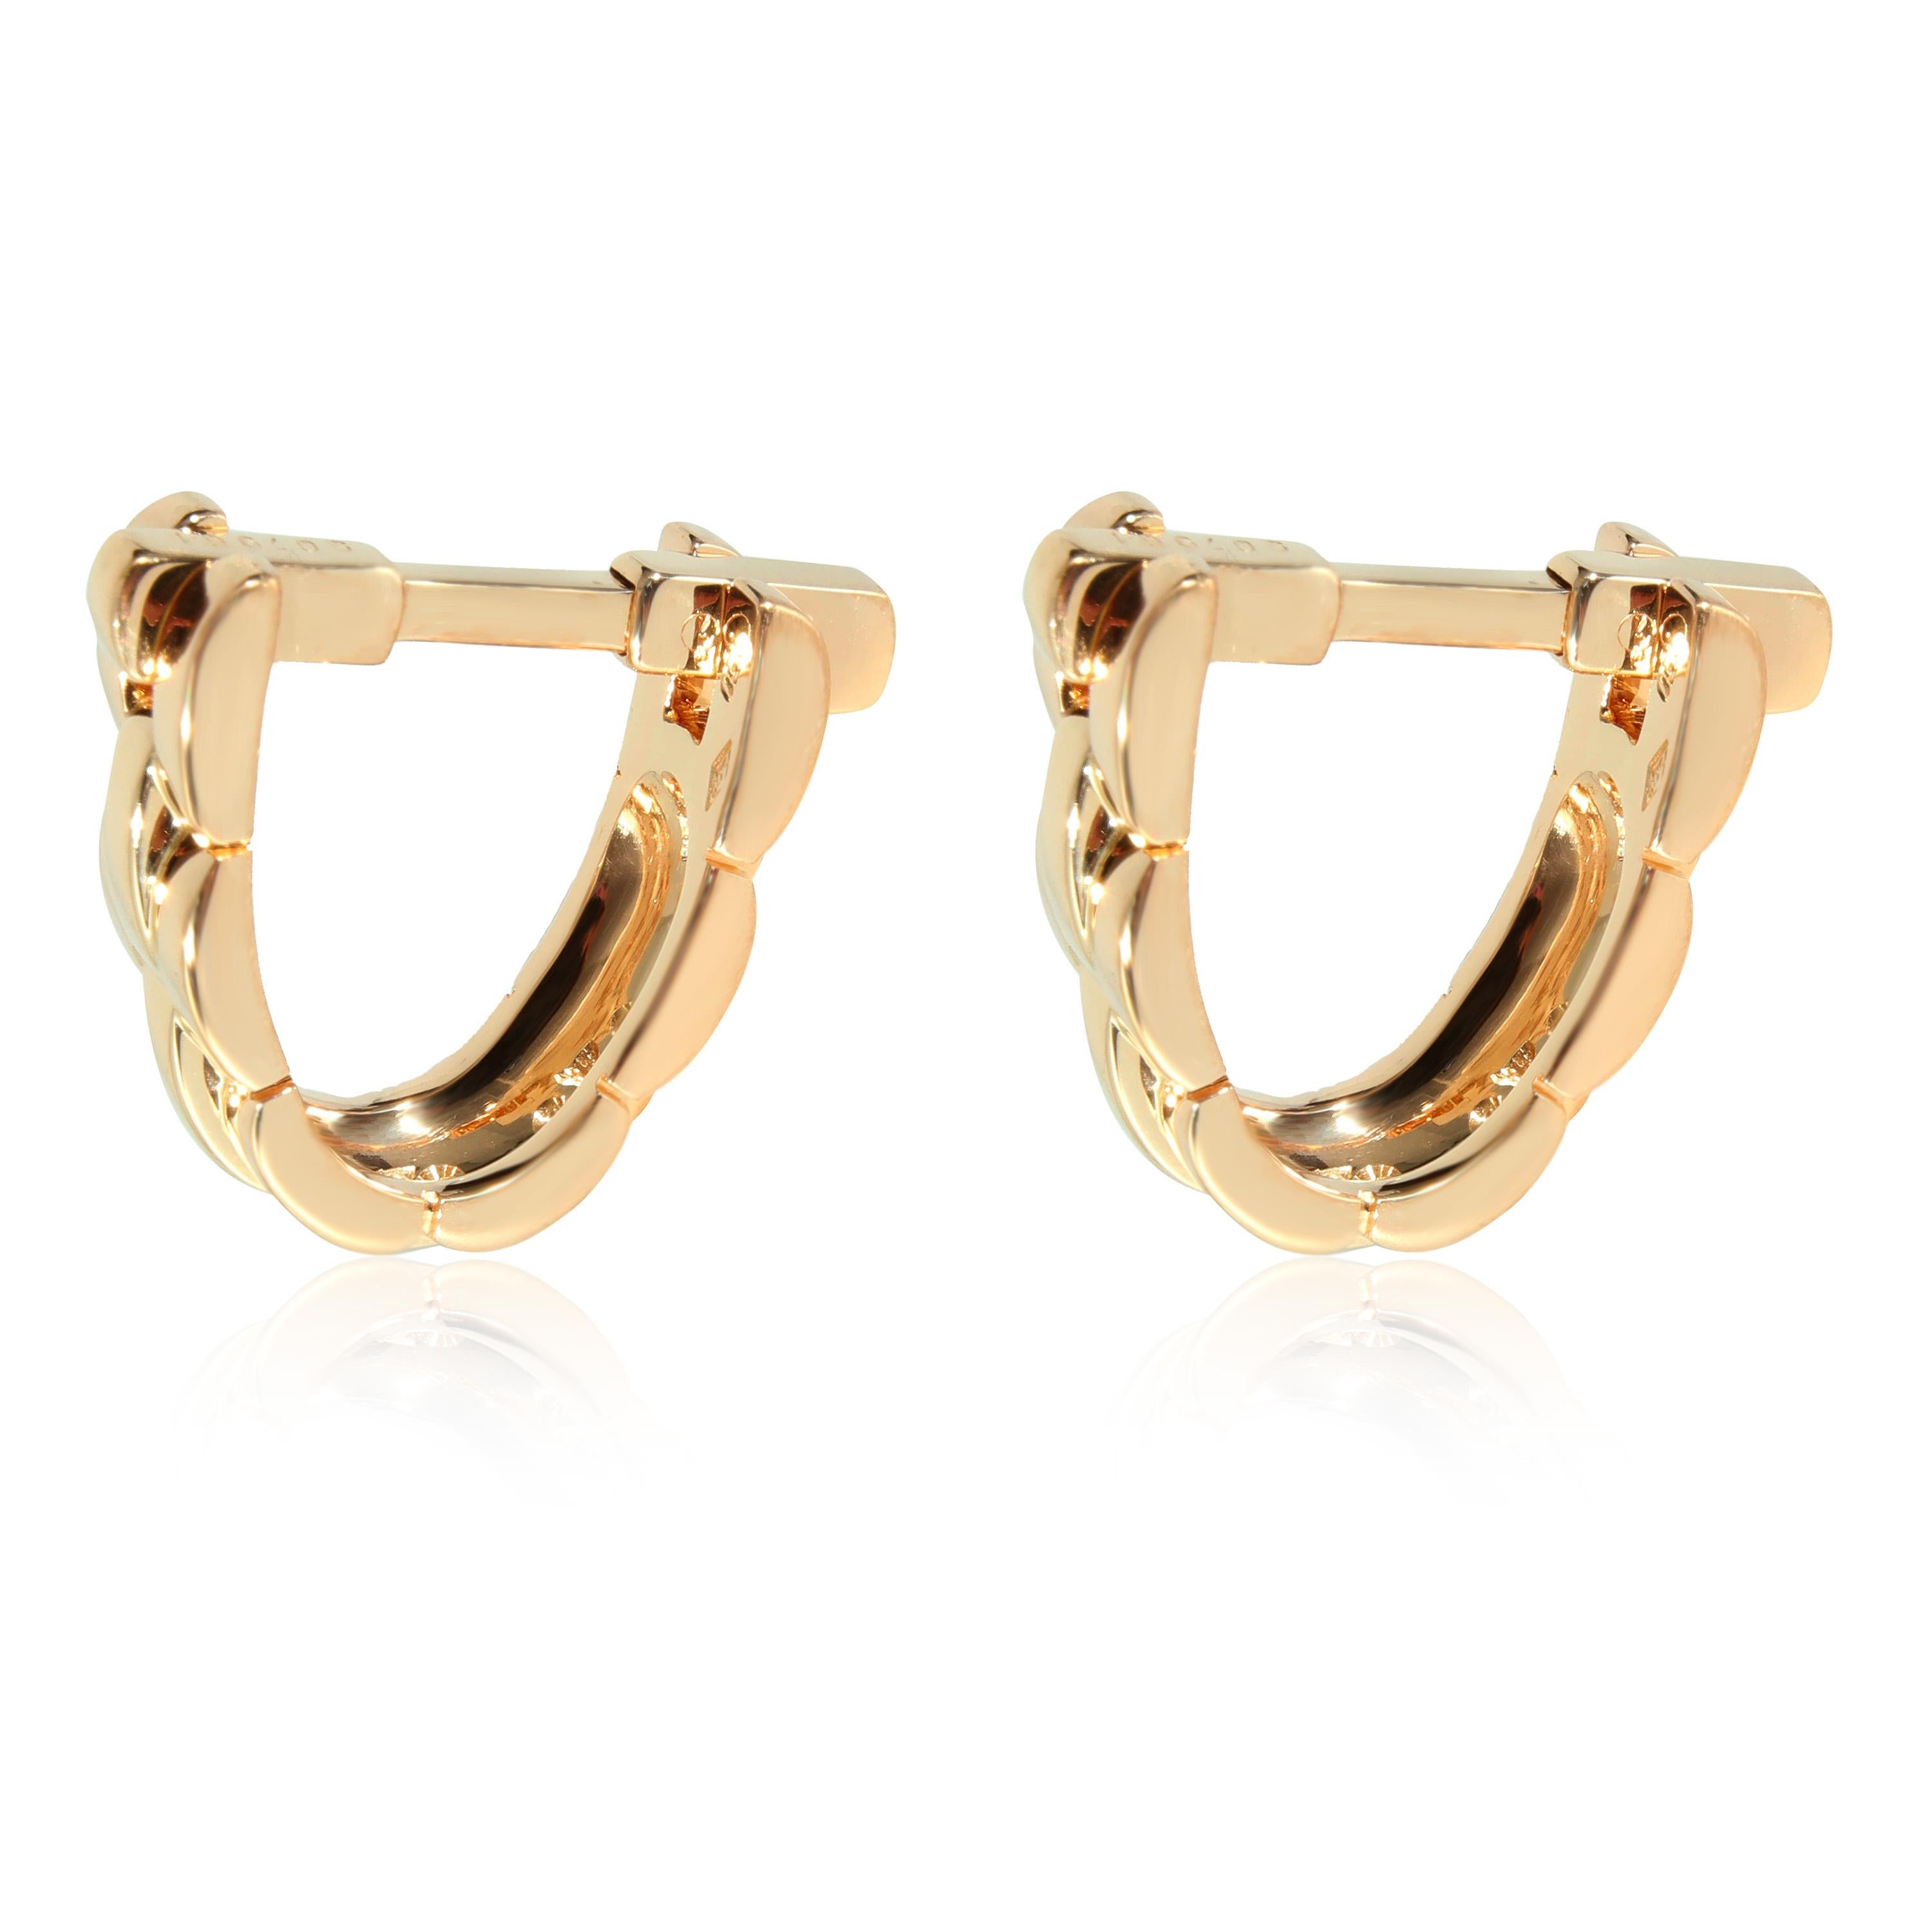 Cartier Maillon Panthere Cufflinks in 18K Yellow Gold 0.35 CTW

PRIMARY DETAILS
SKU: 131349
Listing Title: Cartier Maillon Panthere Cufflinks in 18K Yellow Gold 0.35 CTW
Condition Description: Comes with the original box.
Brand: